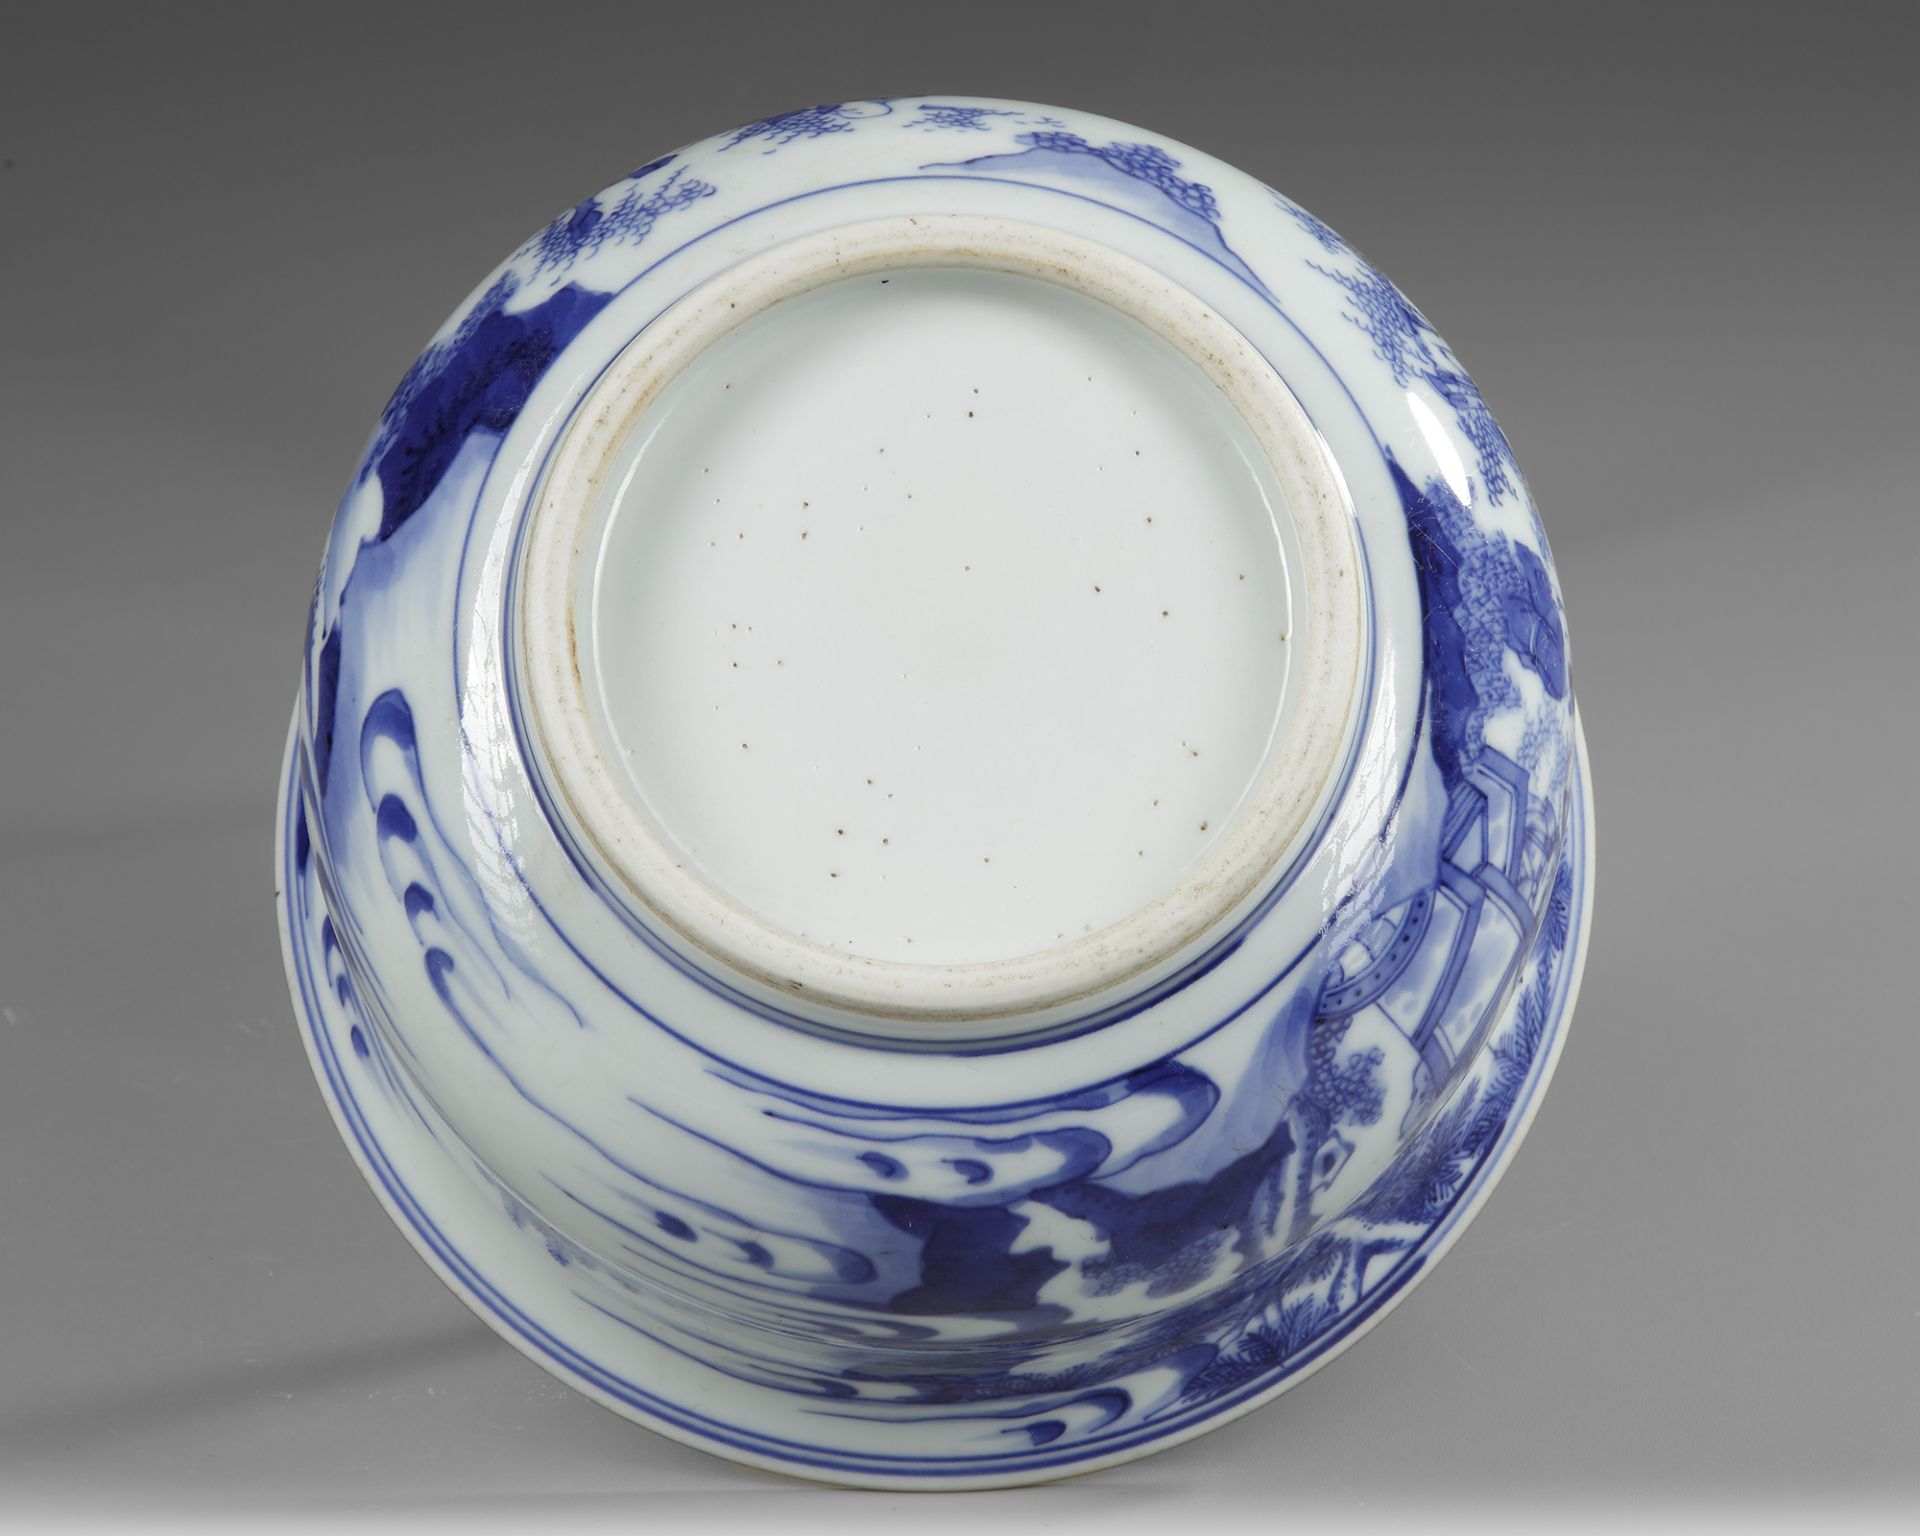 A CHINESE BLUE AND WHITE BOWL, QING DYNASTY (1662-1912) - Image 4 of 4